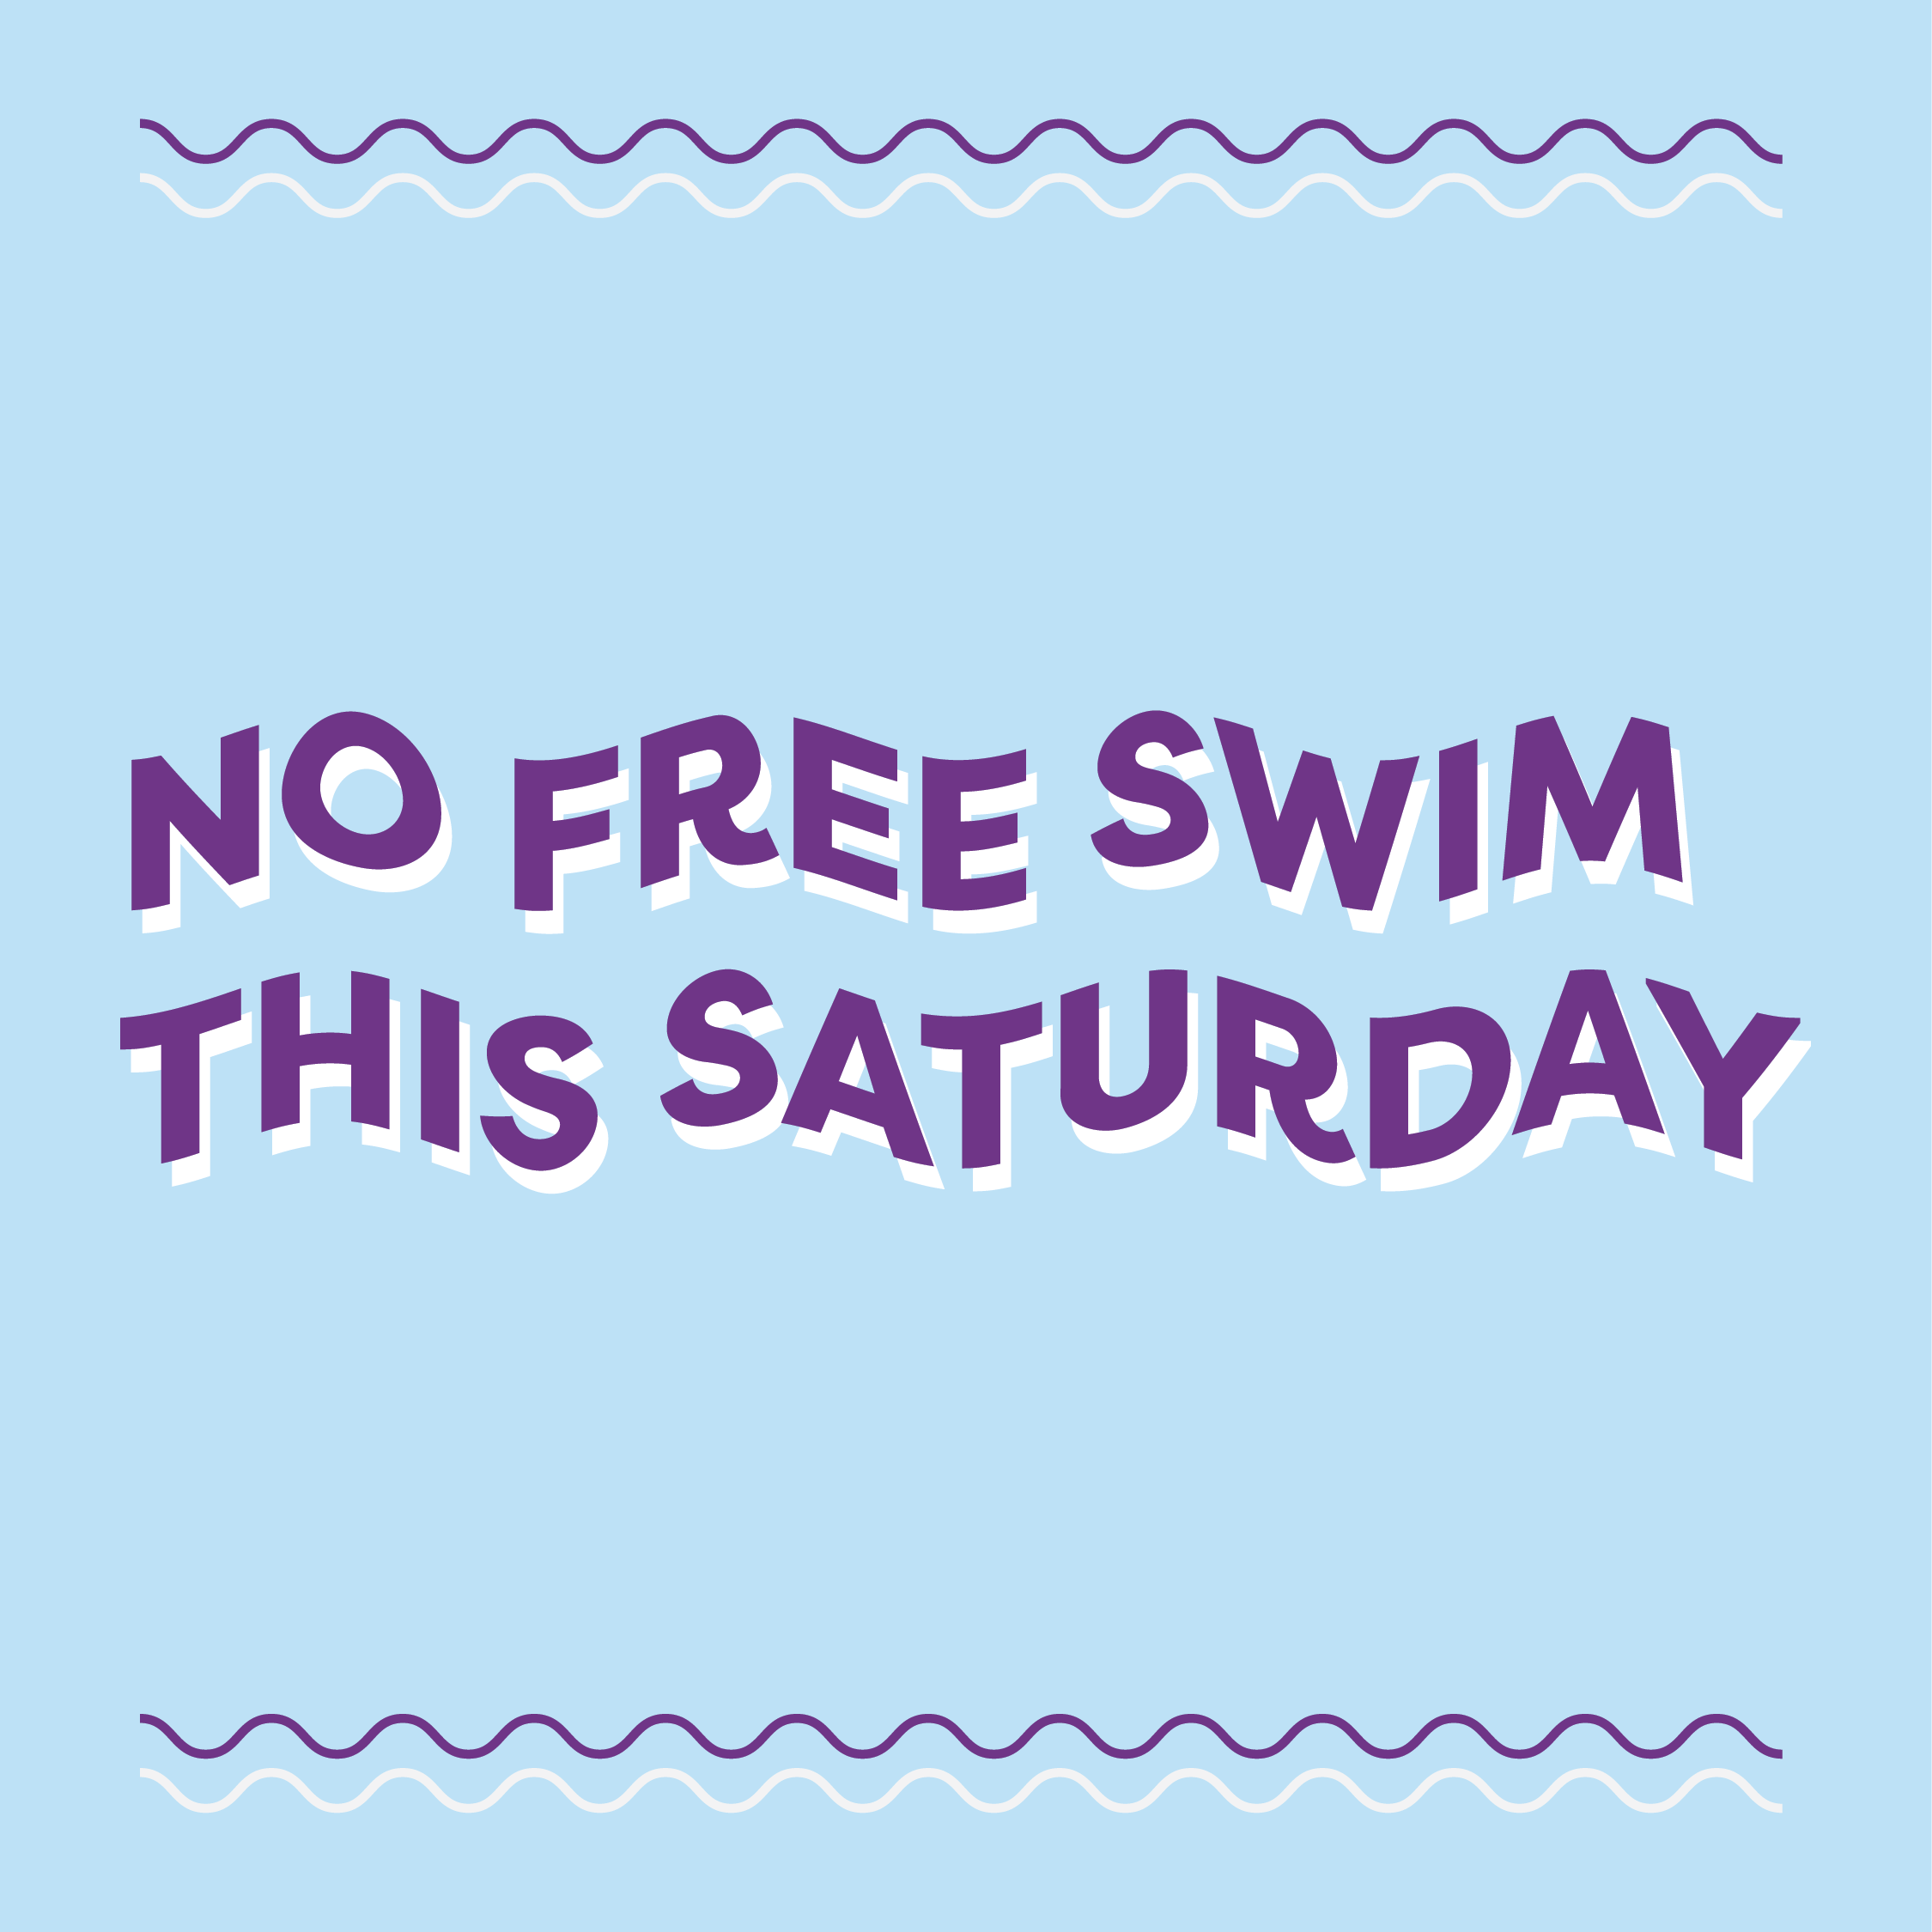 NO FREE SWIM Graphic with blue and purple